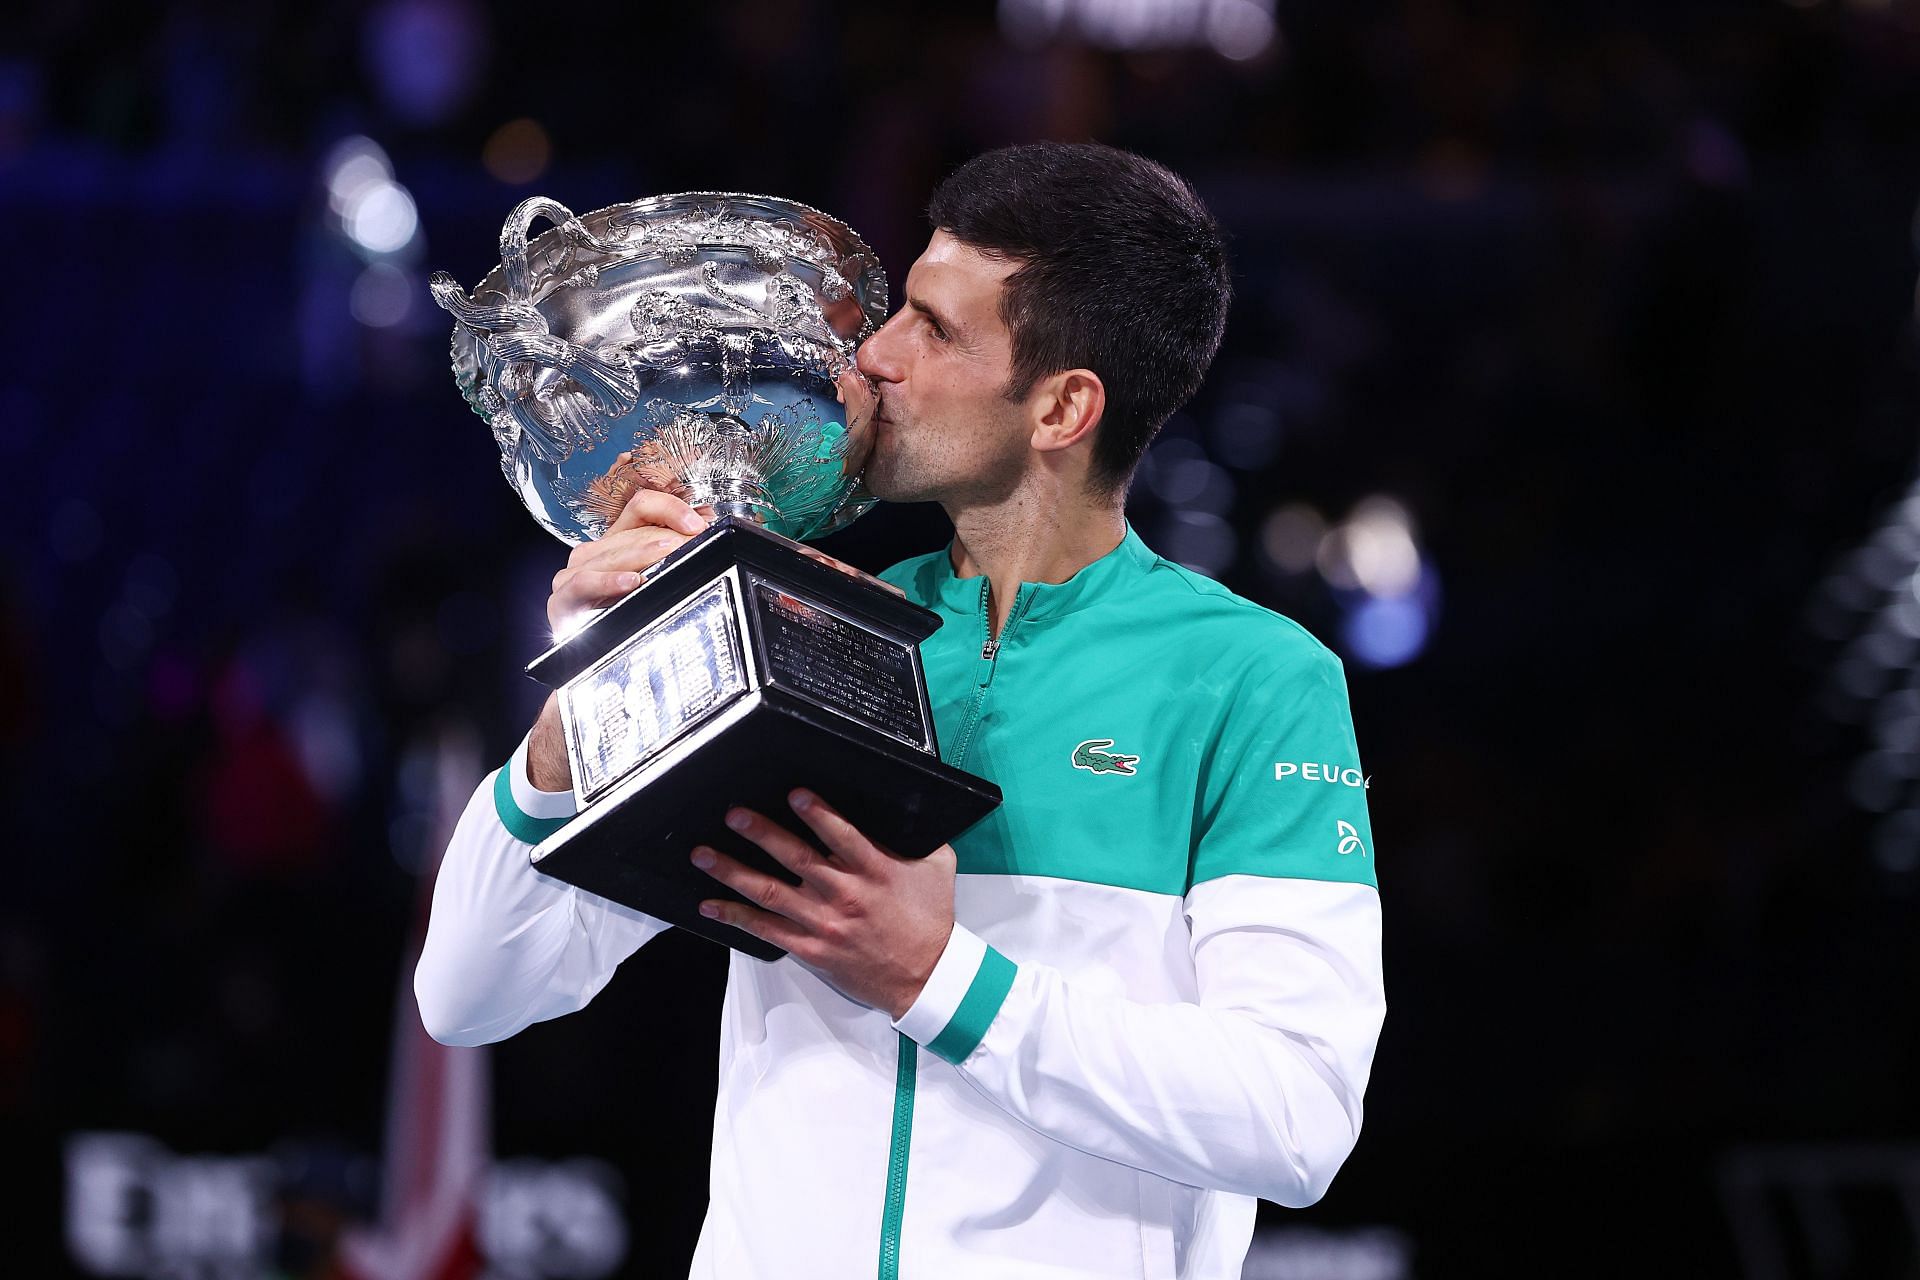 The Serb with his 2021 Australian Open trophy